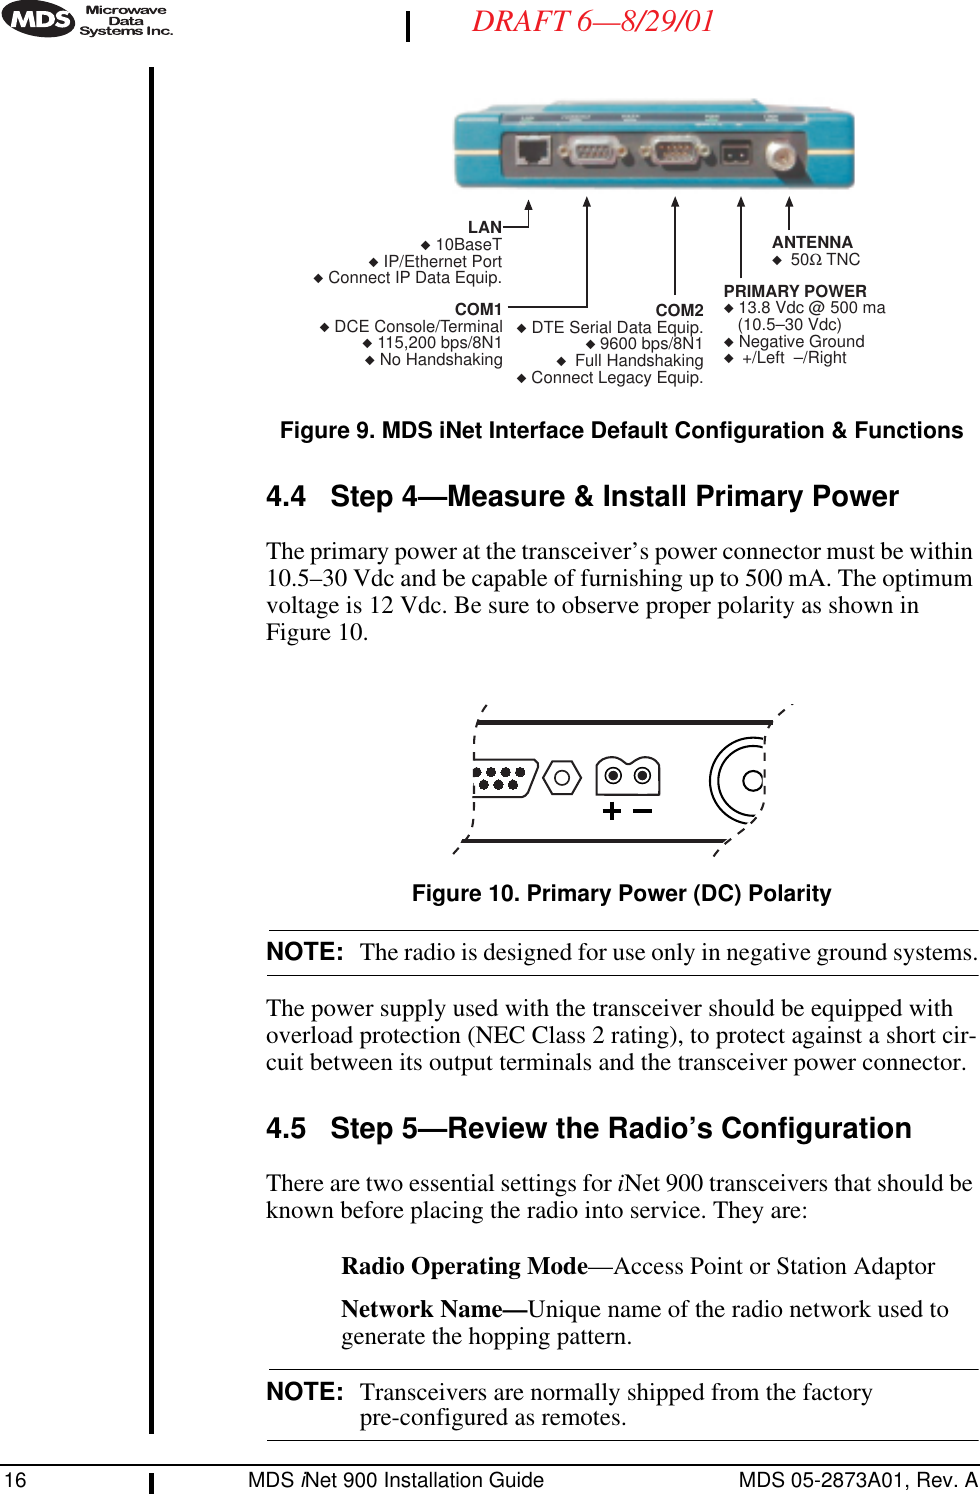 16 MDS iNet 900 Installation Guide MDS 05-2873A01, Rev. ADRAFT 6—8/29/01Invisible place holderFigure 9. MDS iNet Interface Default Configuration &amp; Functions4.4 Step 4—Measure &amp; Install Primary Power The primary power at the transceiver’s power connector must be within 10.5–30 Vdc and be capable of furnishing up to 500 mA. The optimum voltage is 12 Vdc. Be sure to observe proper polarity as shown in Figure 10.Invisible place holderFigure 10. Primary Power (DC) PolarityNOTE: The radio is designed for use only in negative ground systems.The power supply used with the transceiver should be equipped with overload protection (NEC Class 2 rating), to protect against a short cir-cuit between its output terminals and the transceiver power connector.4.5 Step 5—Review the Radio’s ConfigurationThere are two essential settings for iNet 900 transceivers that should be known before placing the radio into service. They are:Radio Operating Mode—Access Point or Station AdaptorNetwork Name—Unique name of the radio network used to generate the hopping pattern.NOTE: Transceivers are normally shipped from the factory pre-configured as remotes.COM2◆ DTE Serial Data Equip.◆ 9600 bps/8N1◆  Full Handshaking◆ Connect Legacy Equip.LAN◆ 10BaseT◆ IP/Ethernet Port◆Connect IP Data Equip.COM1◆DCE Console/Terminal◆ 115,200 bps/8N1◆No HandshakingPRIMARY POWER◆ 13.8 Vdc @ 500 ma(10.5–30 Vdc)◆ Negative Ground◆  +/Left  –/RightANTENNA◆  50Ω TNC